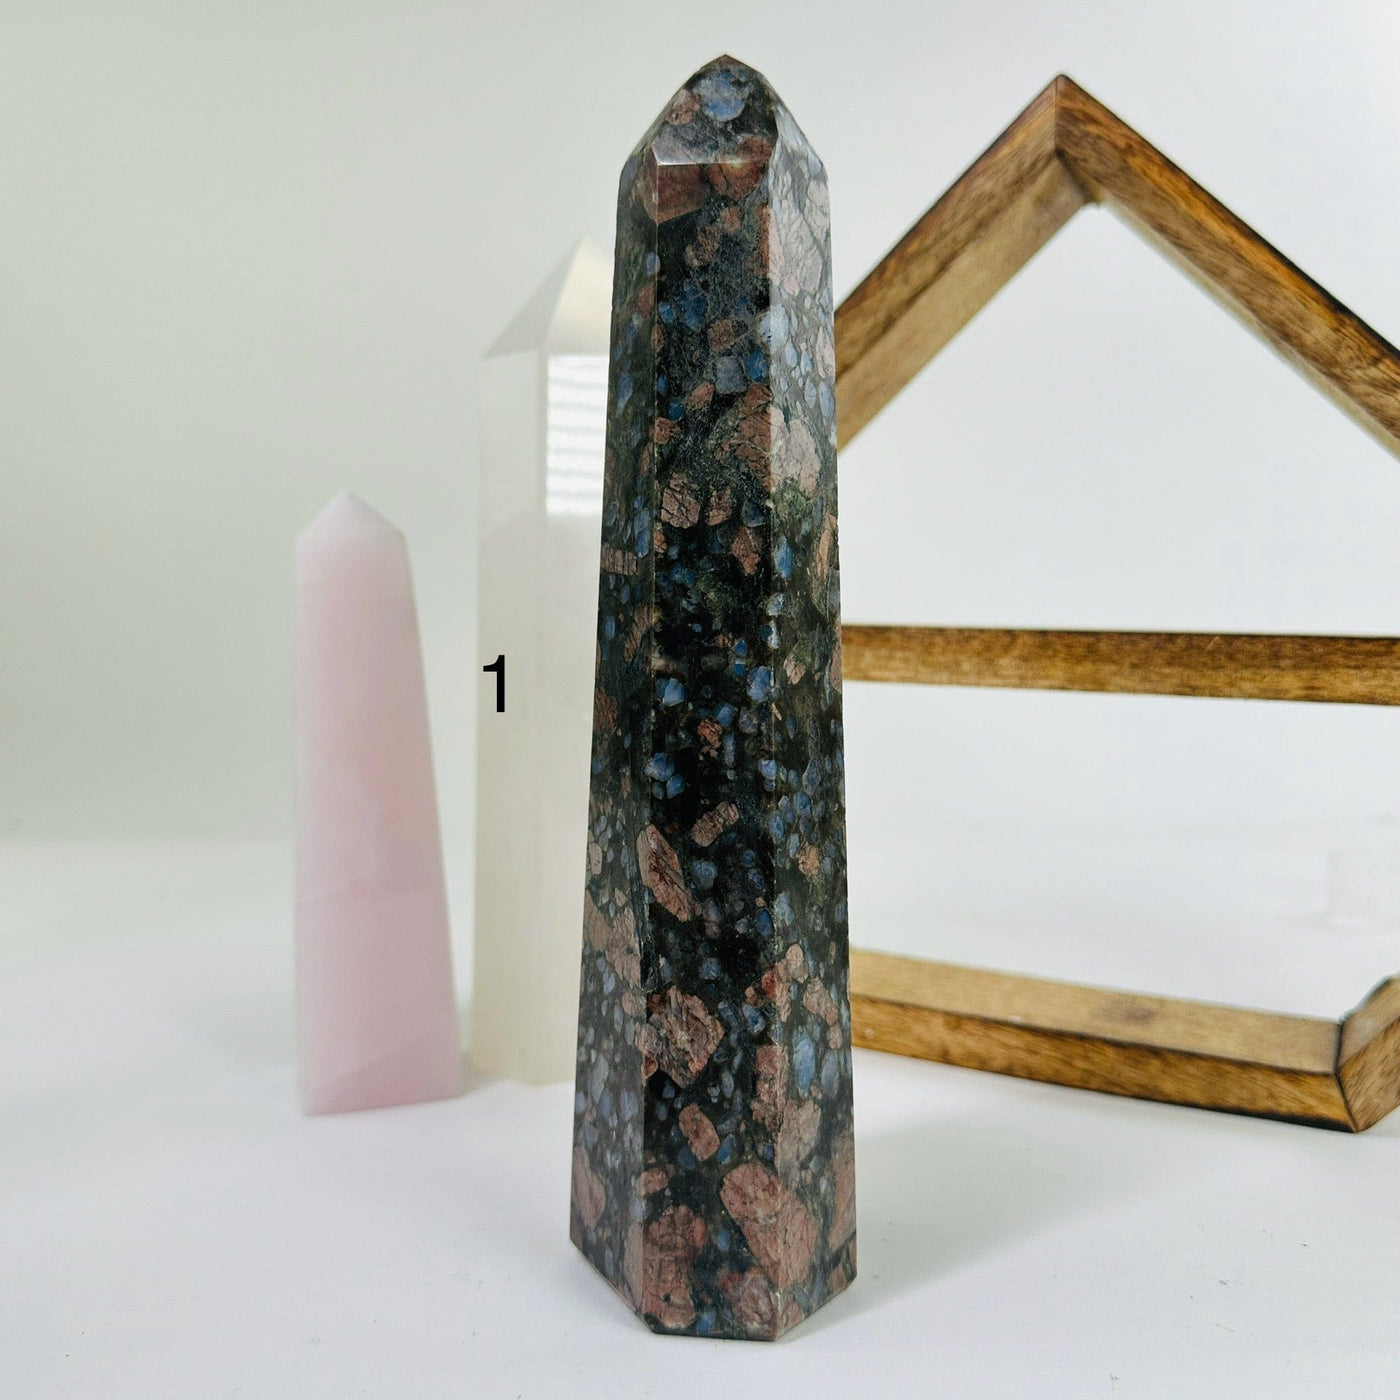 rhyolite points with decorations in the background